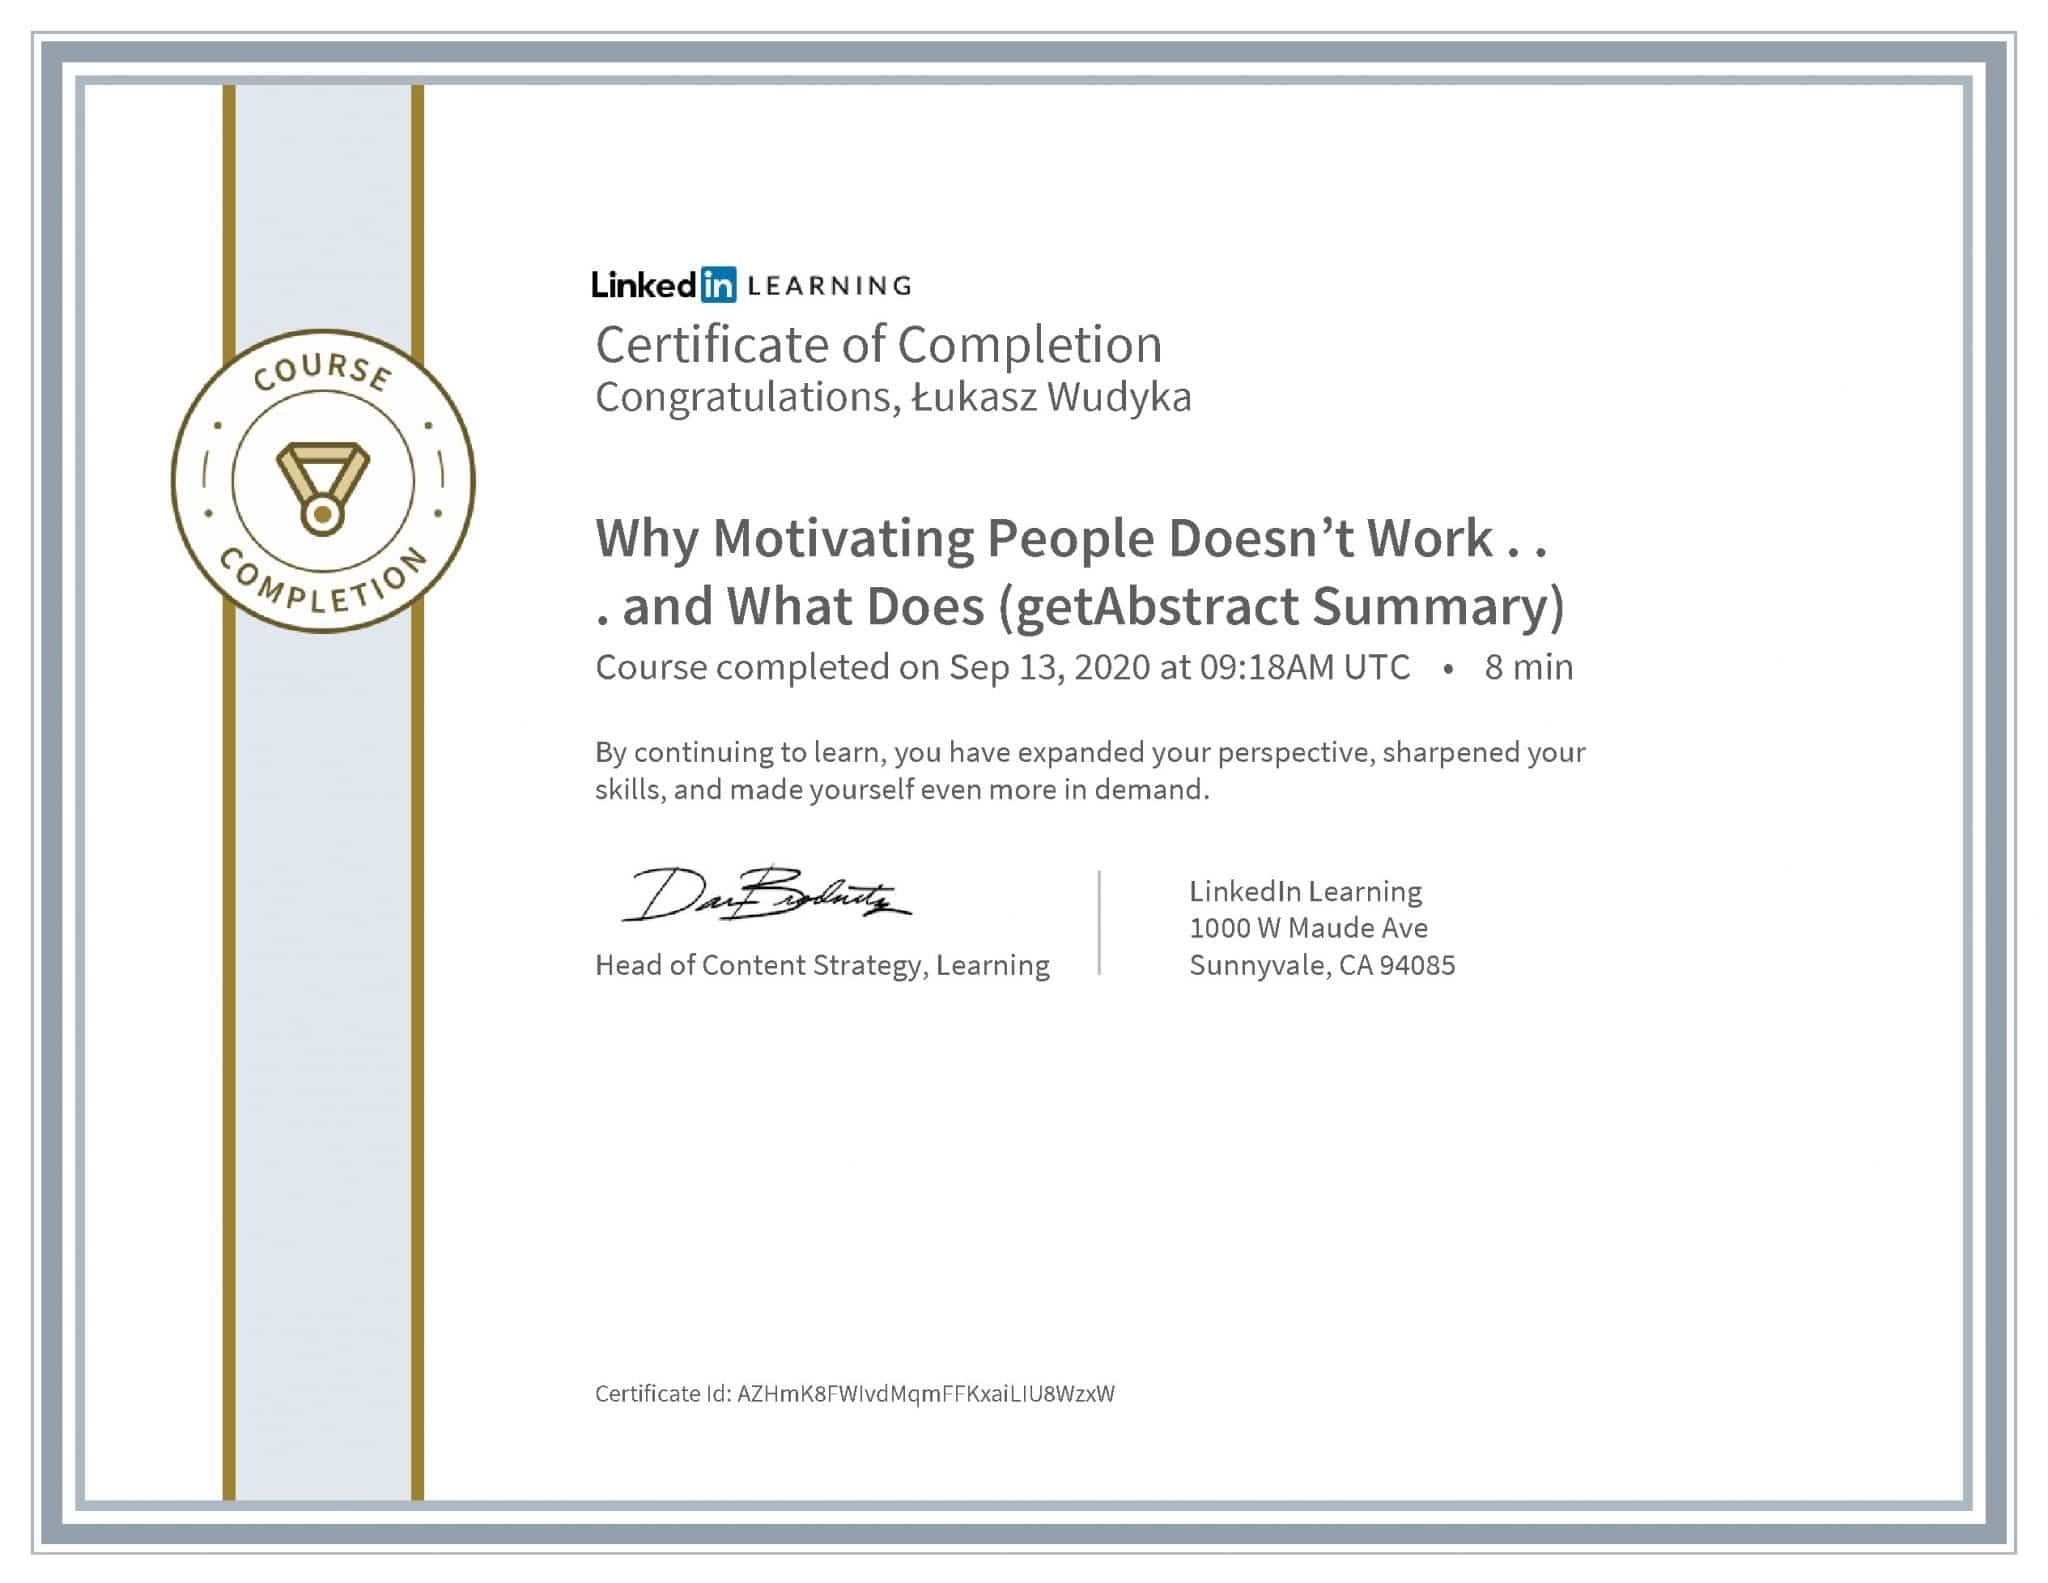 Łukasz Wudyka certyfikat LinkedIn Why Motivating People Doesn't Work... and What Does (getAbstract Summary)